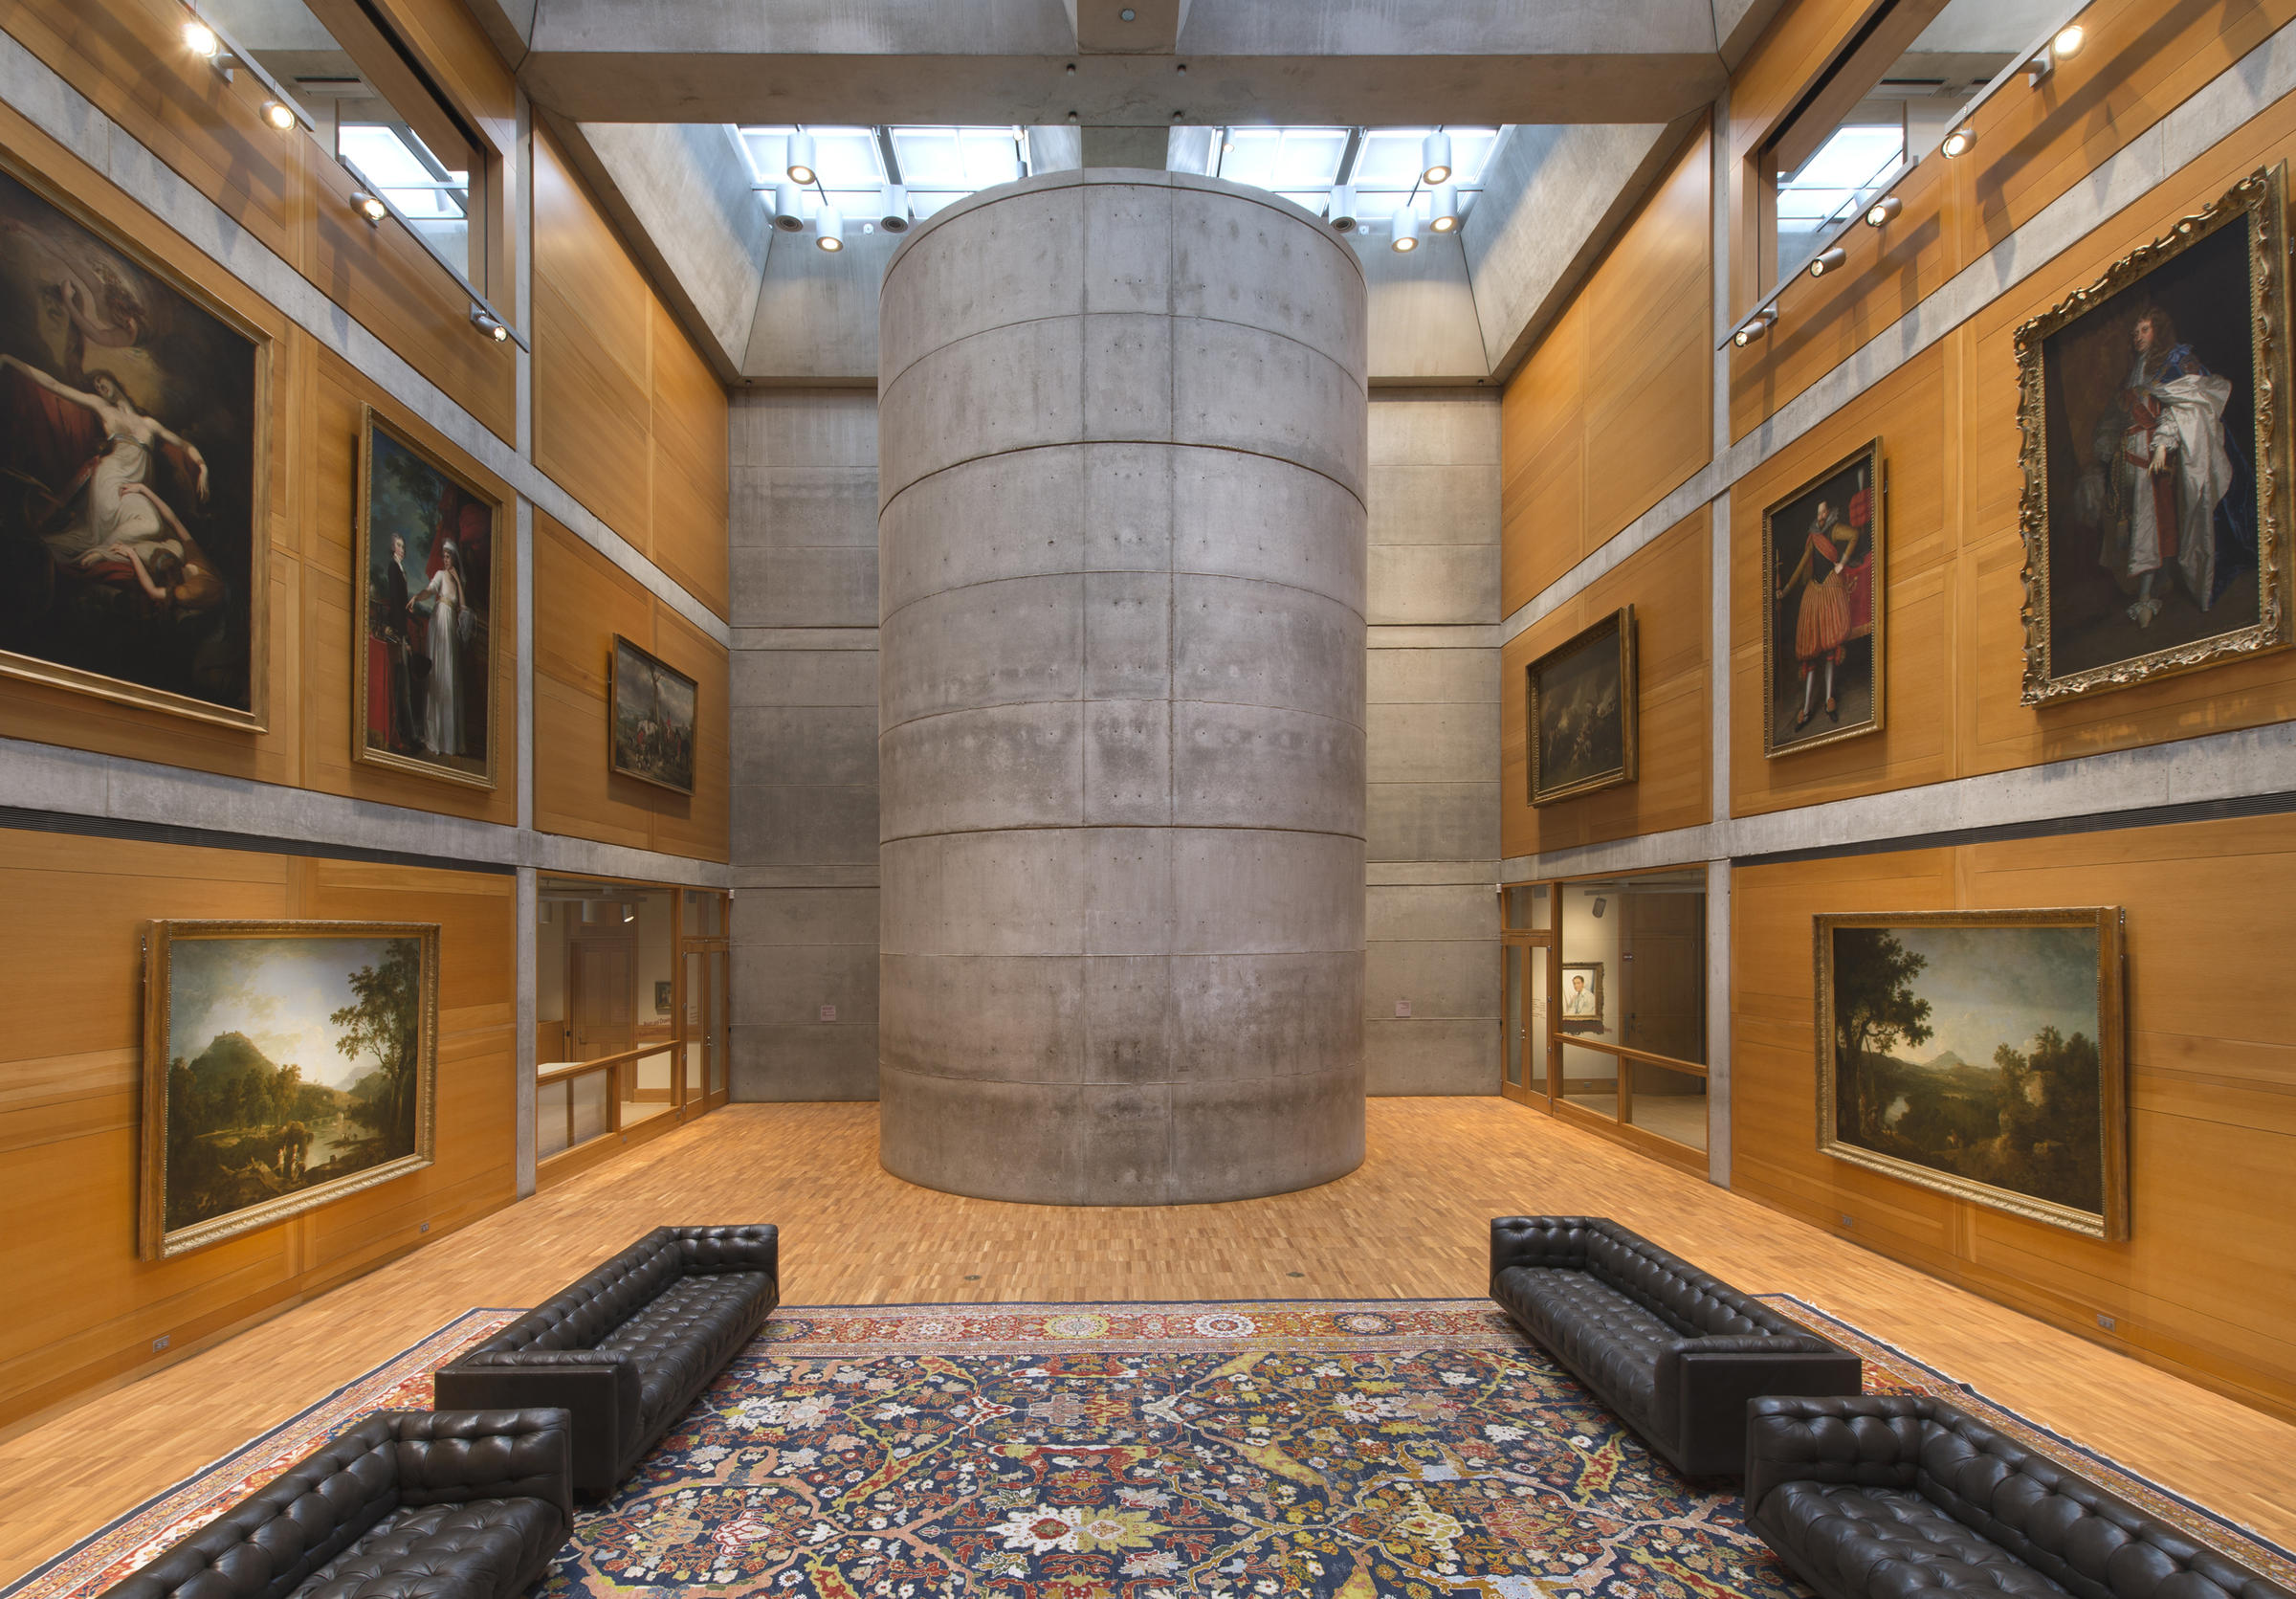 Roger Kimball, James Panero, and Dominic Green on the Yale Center For British Art